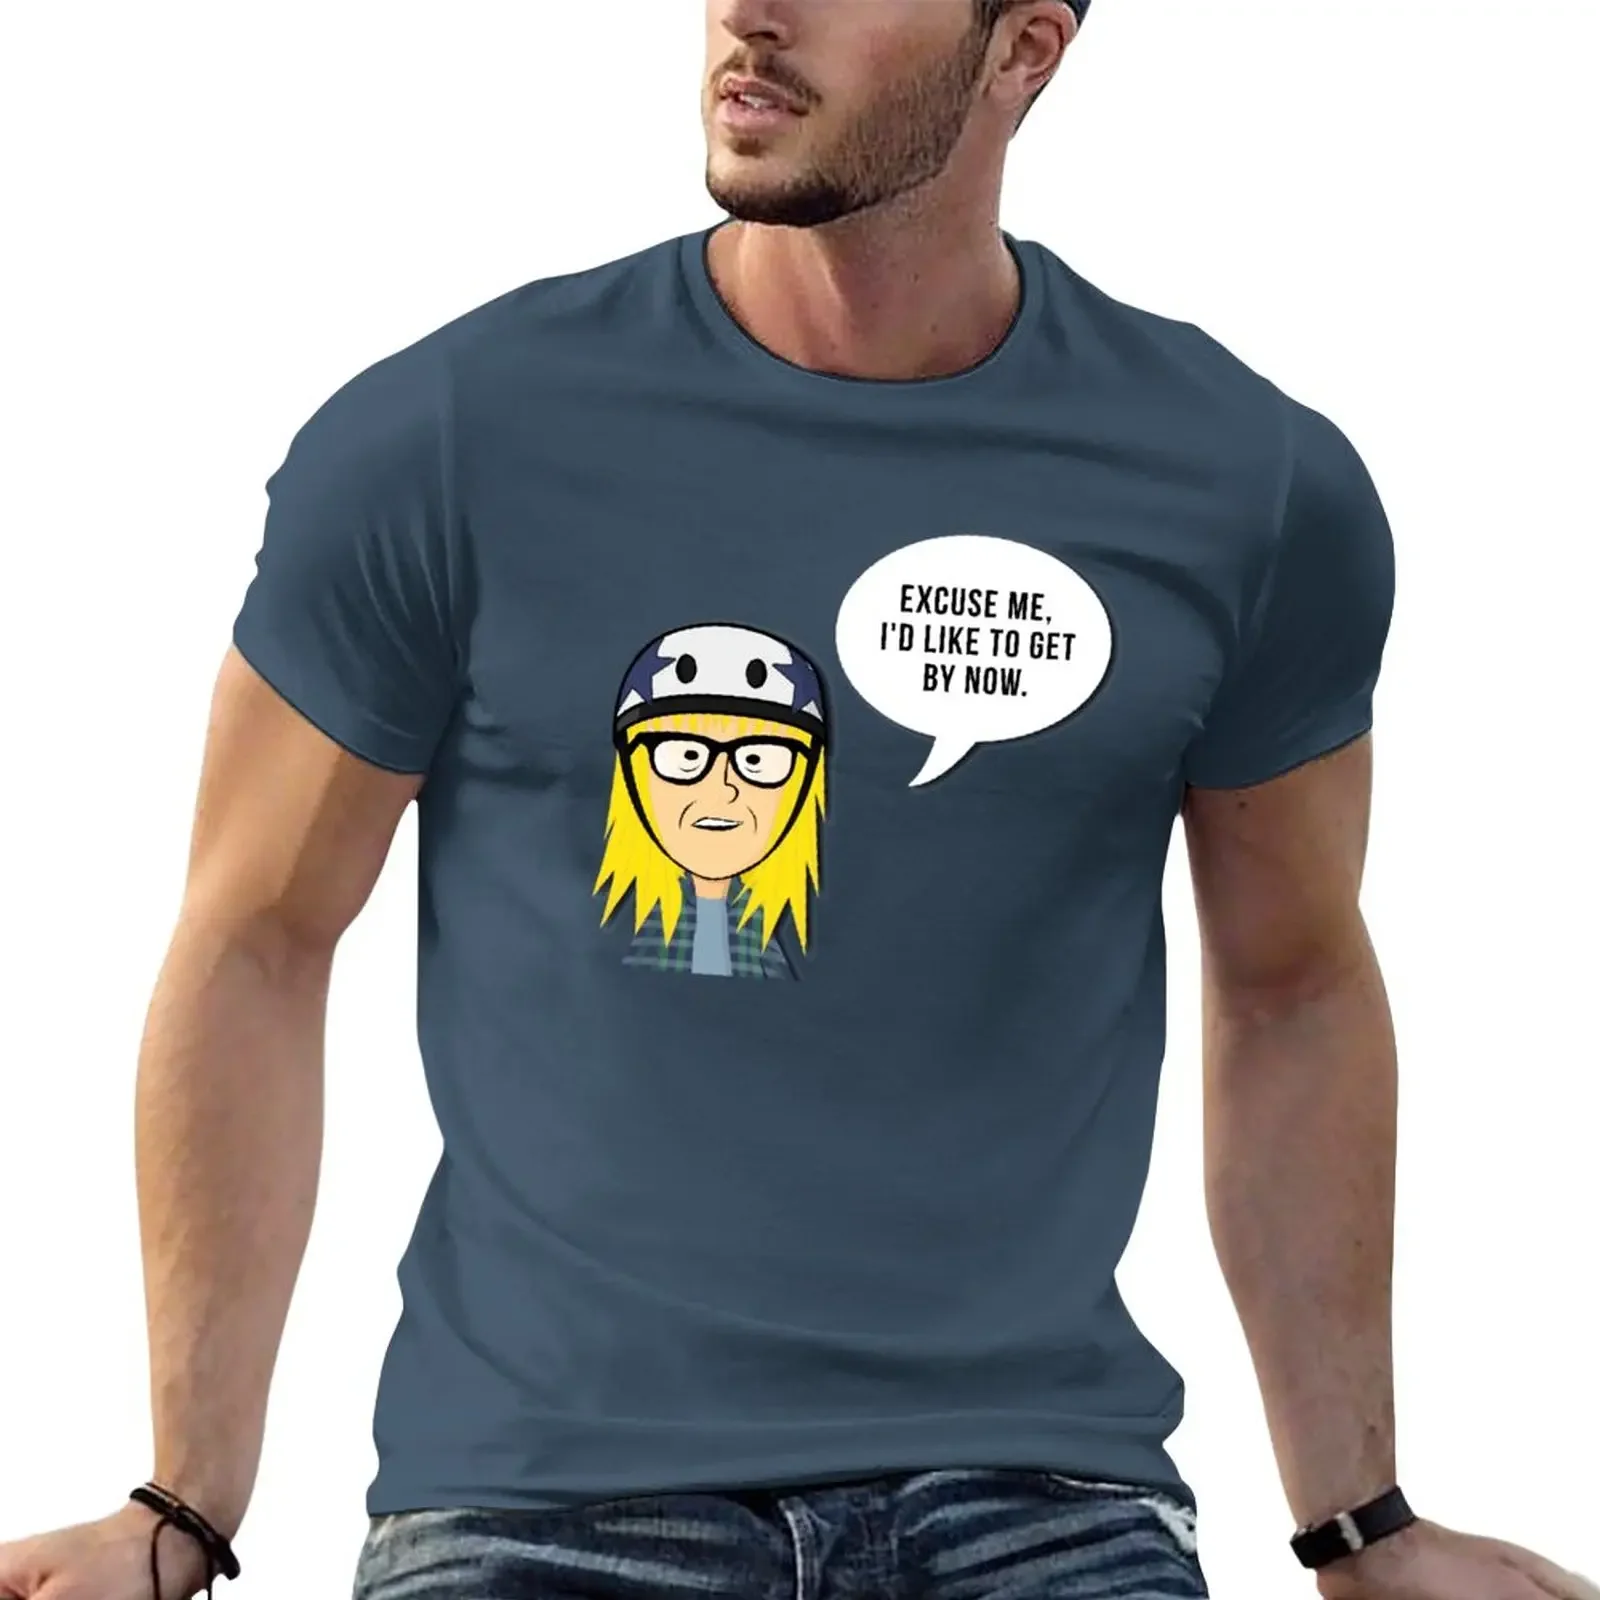 

Derby Garth - Excuse Me I'd Like To Get By Now T-Shirt Blouse summer tops plain black t shirts men